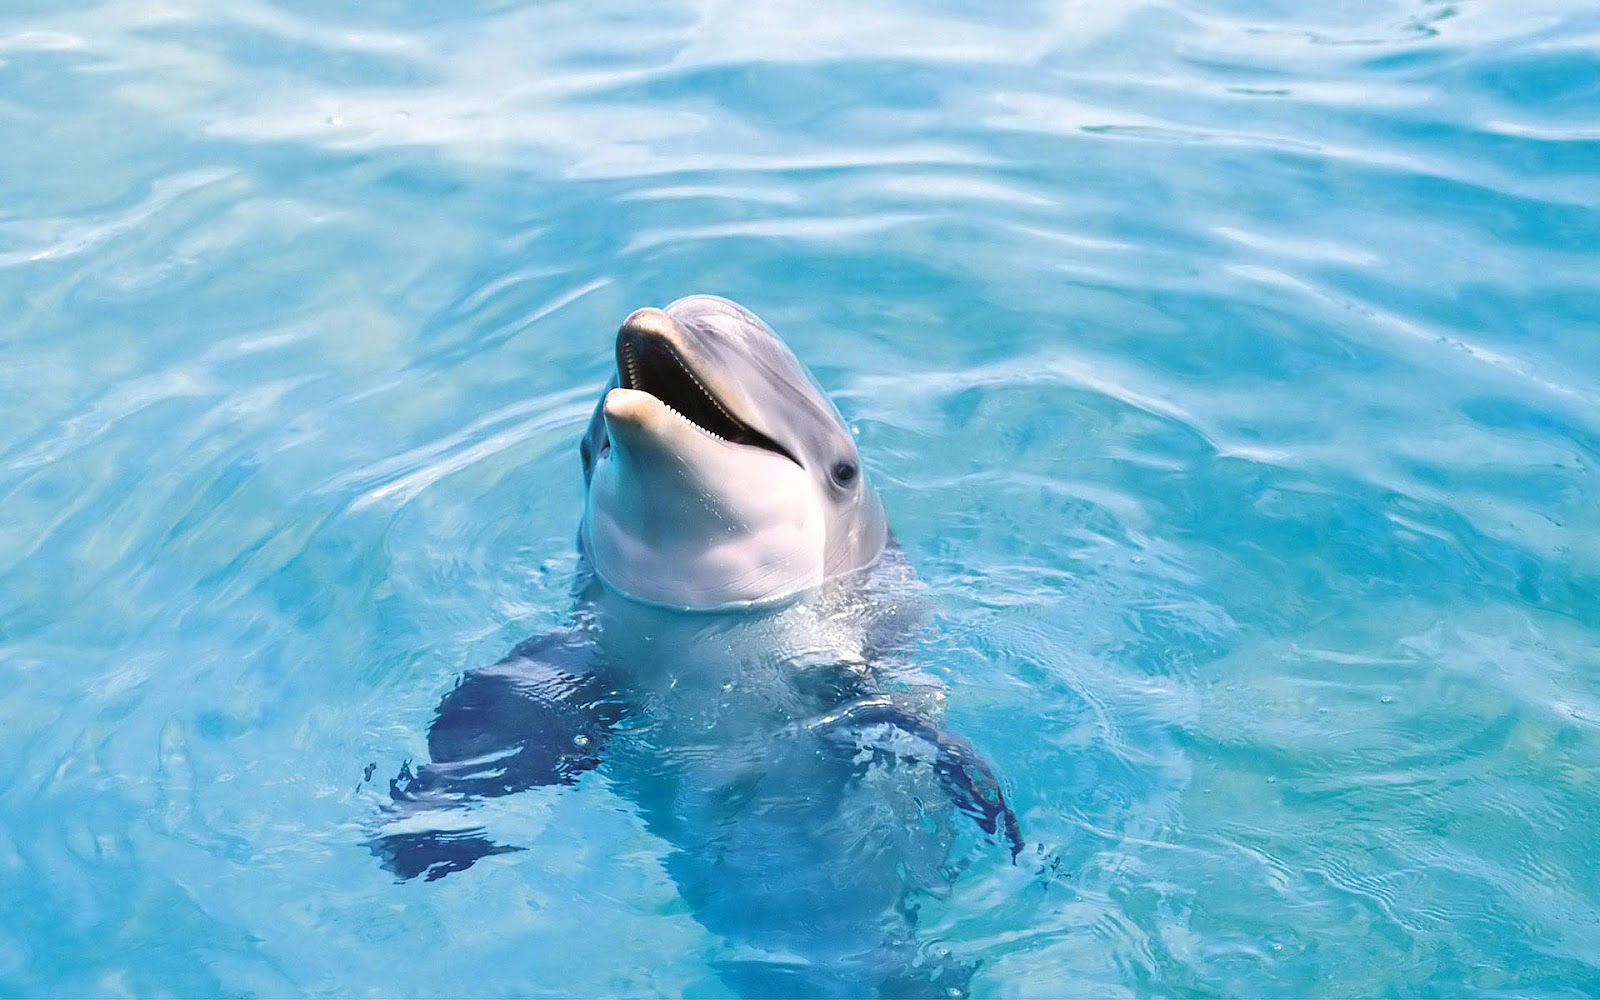 Wallpaper With Dolphin With Head Out Of Water - Dolphin Wallpapers Hd - HD Wallpaper 